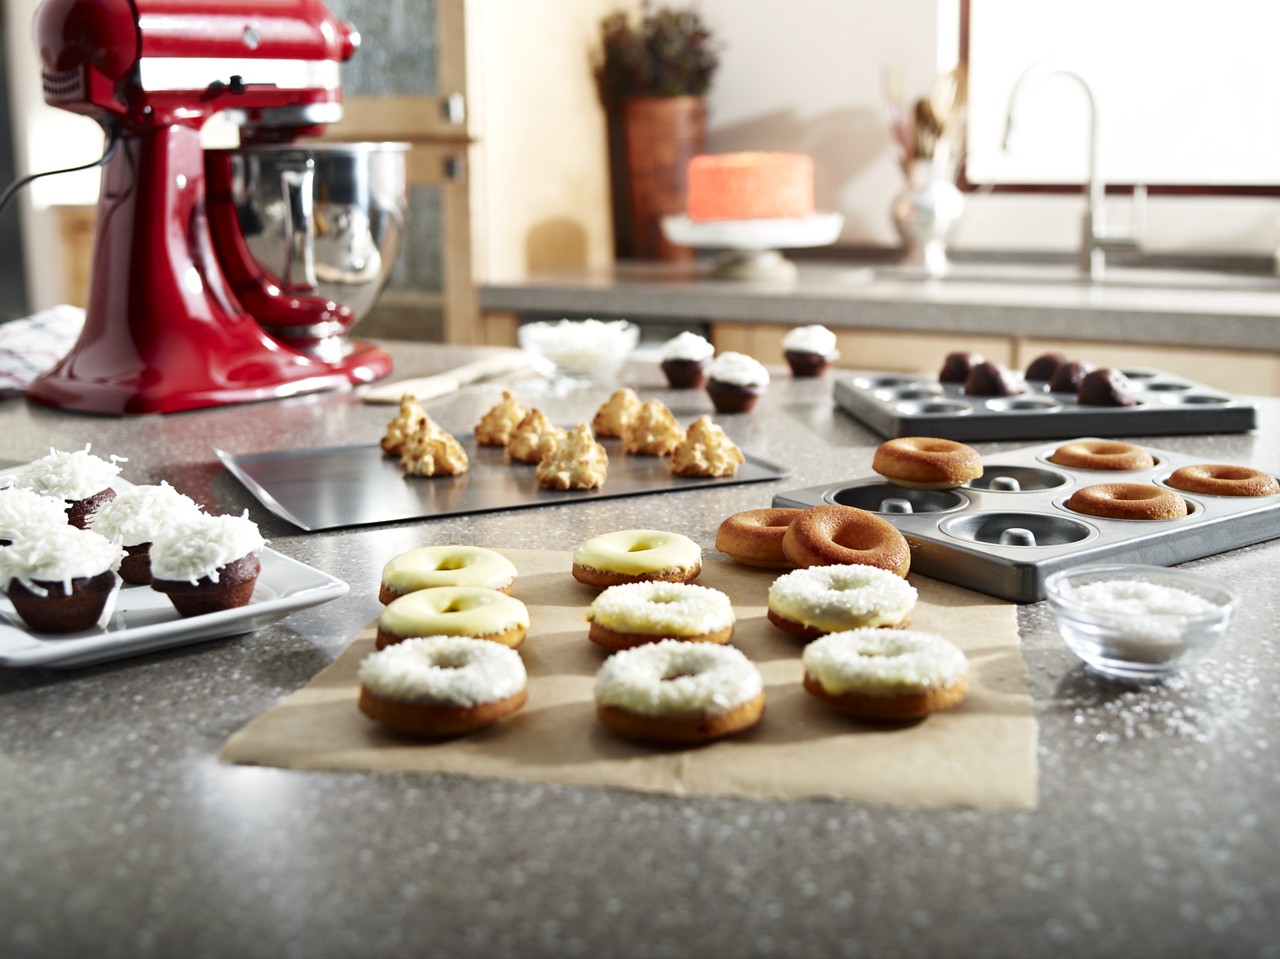 KitchenAid® baking pans are made to last with exceptional durability.